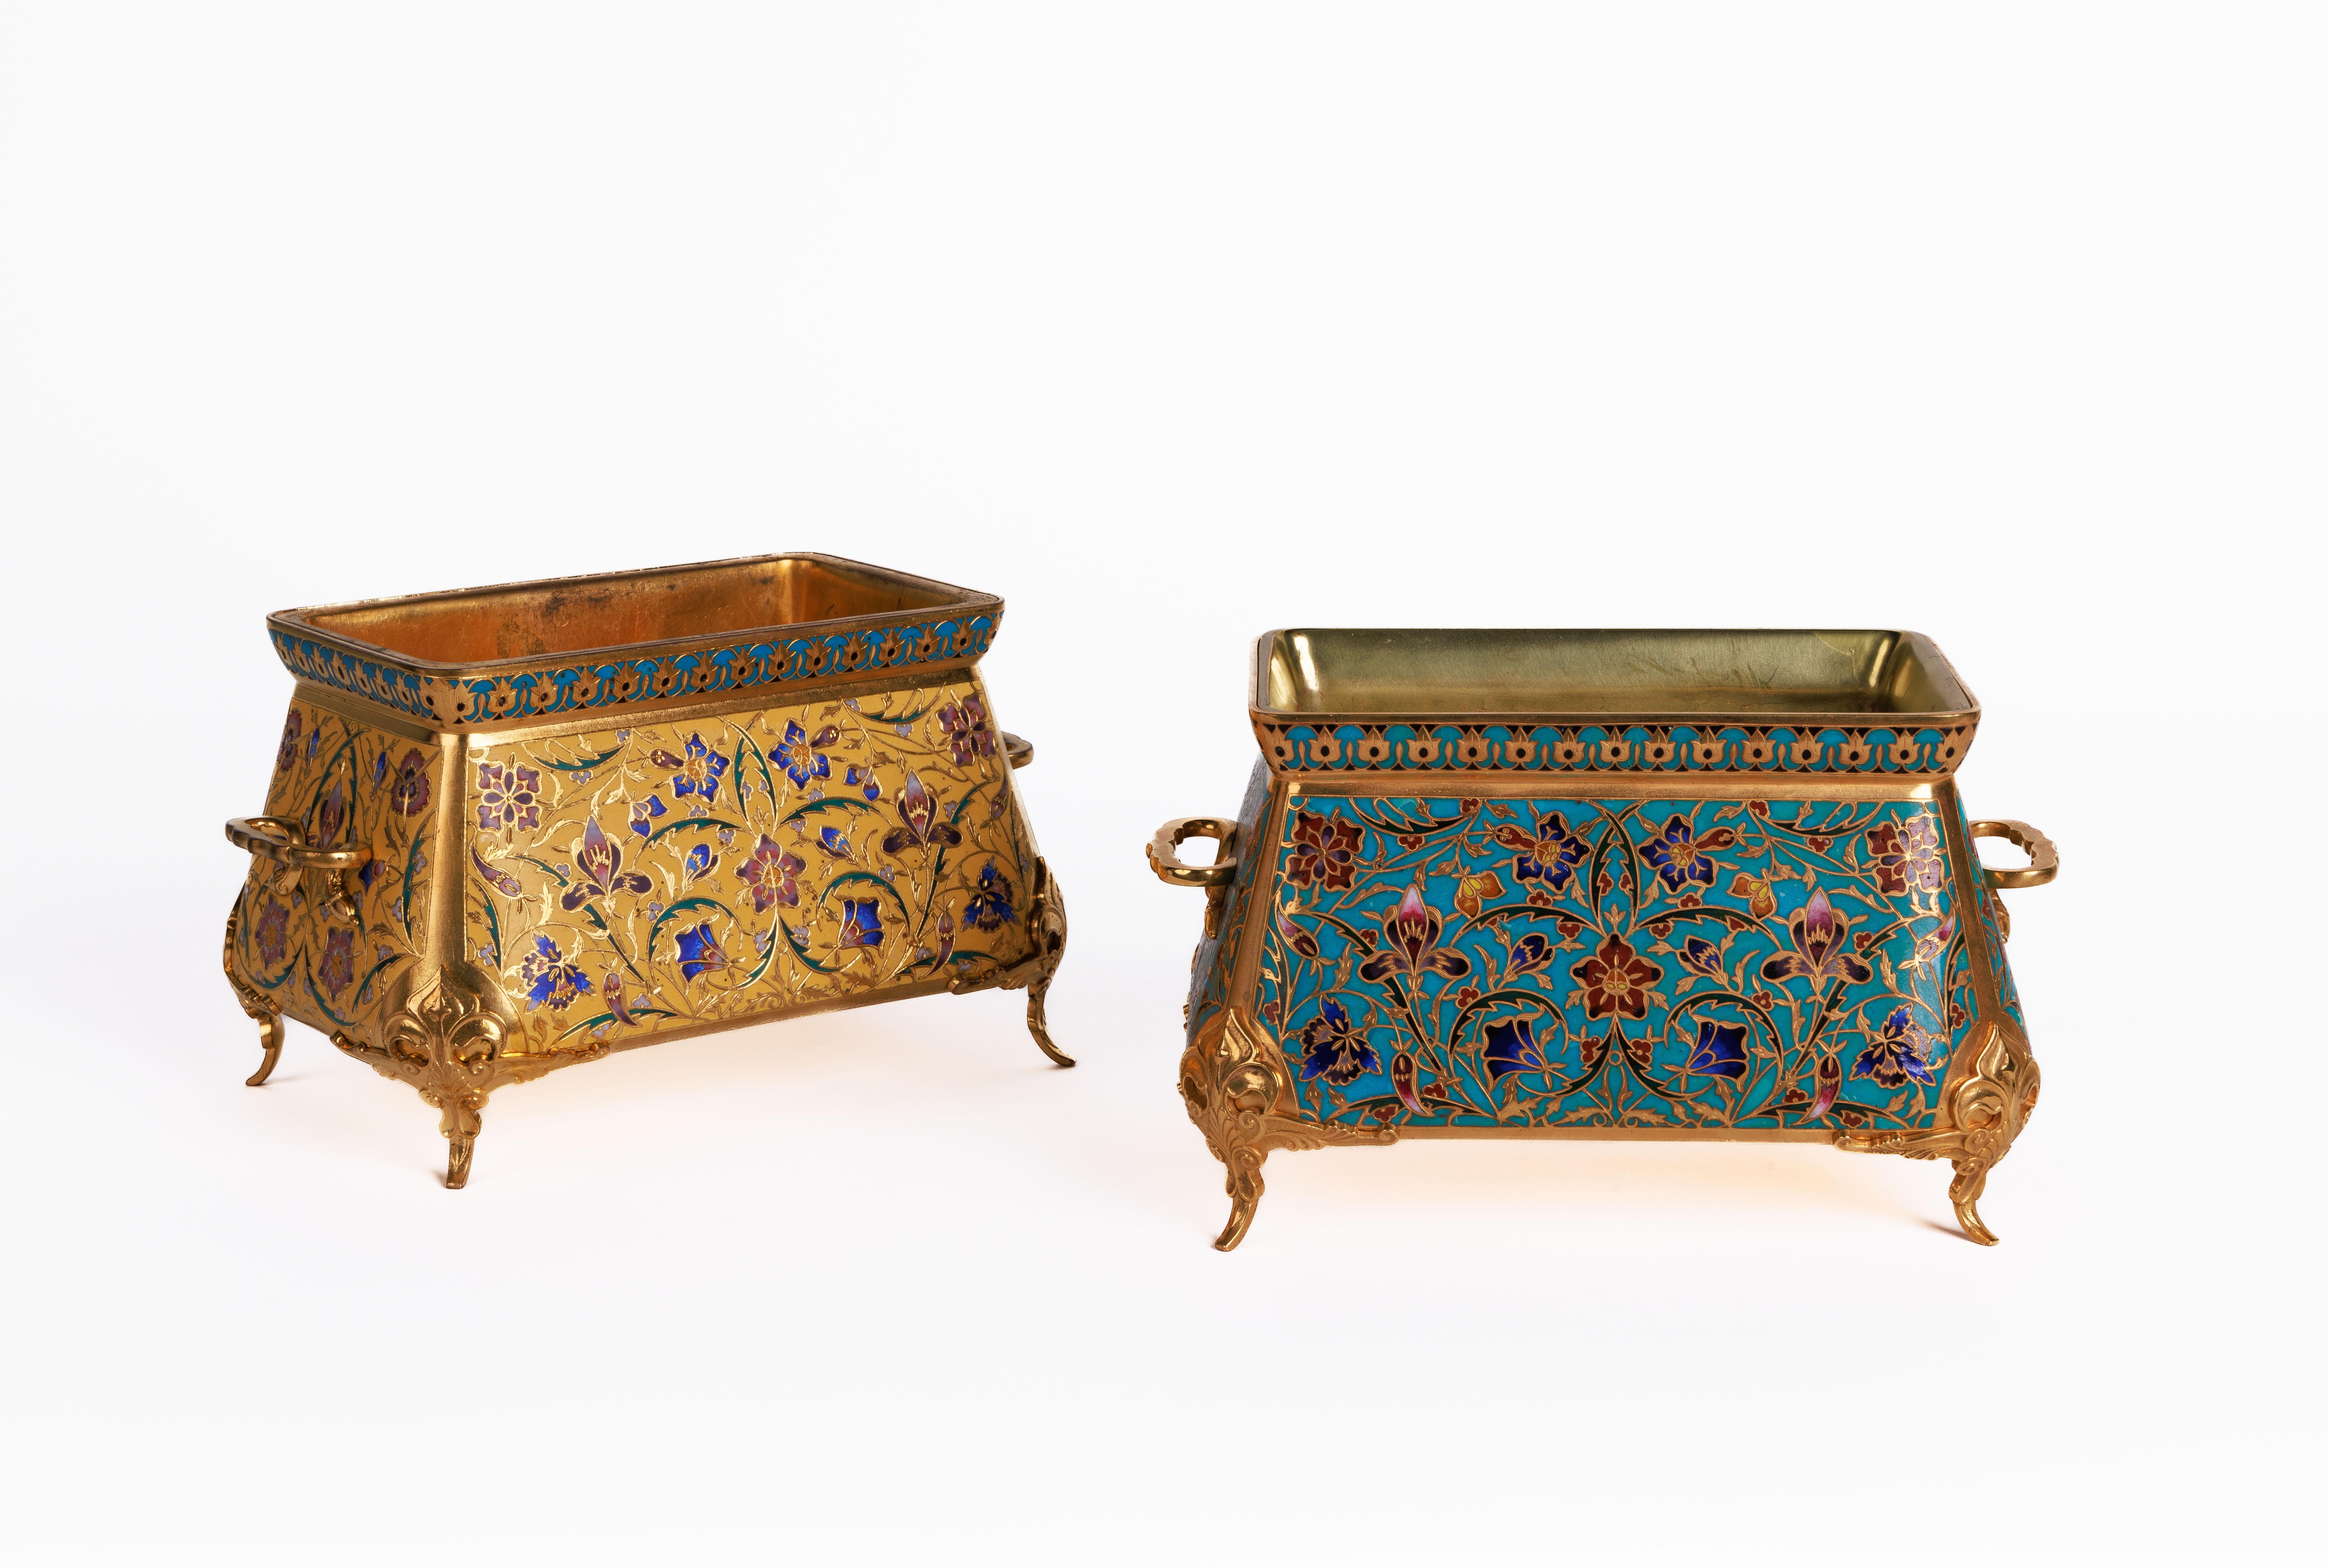 Ferdinand Barbedienne, a French Ormolu and Champleve Enamel Jardiniere, C. 1870 For Sale 6